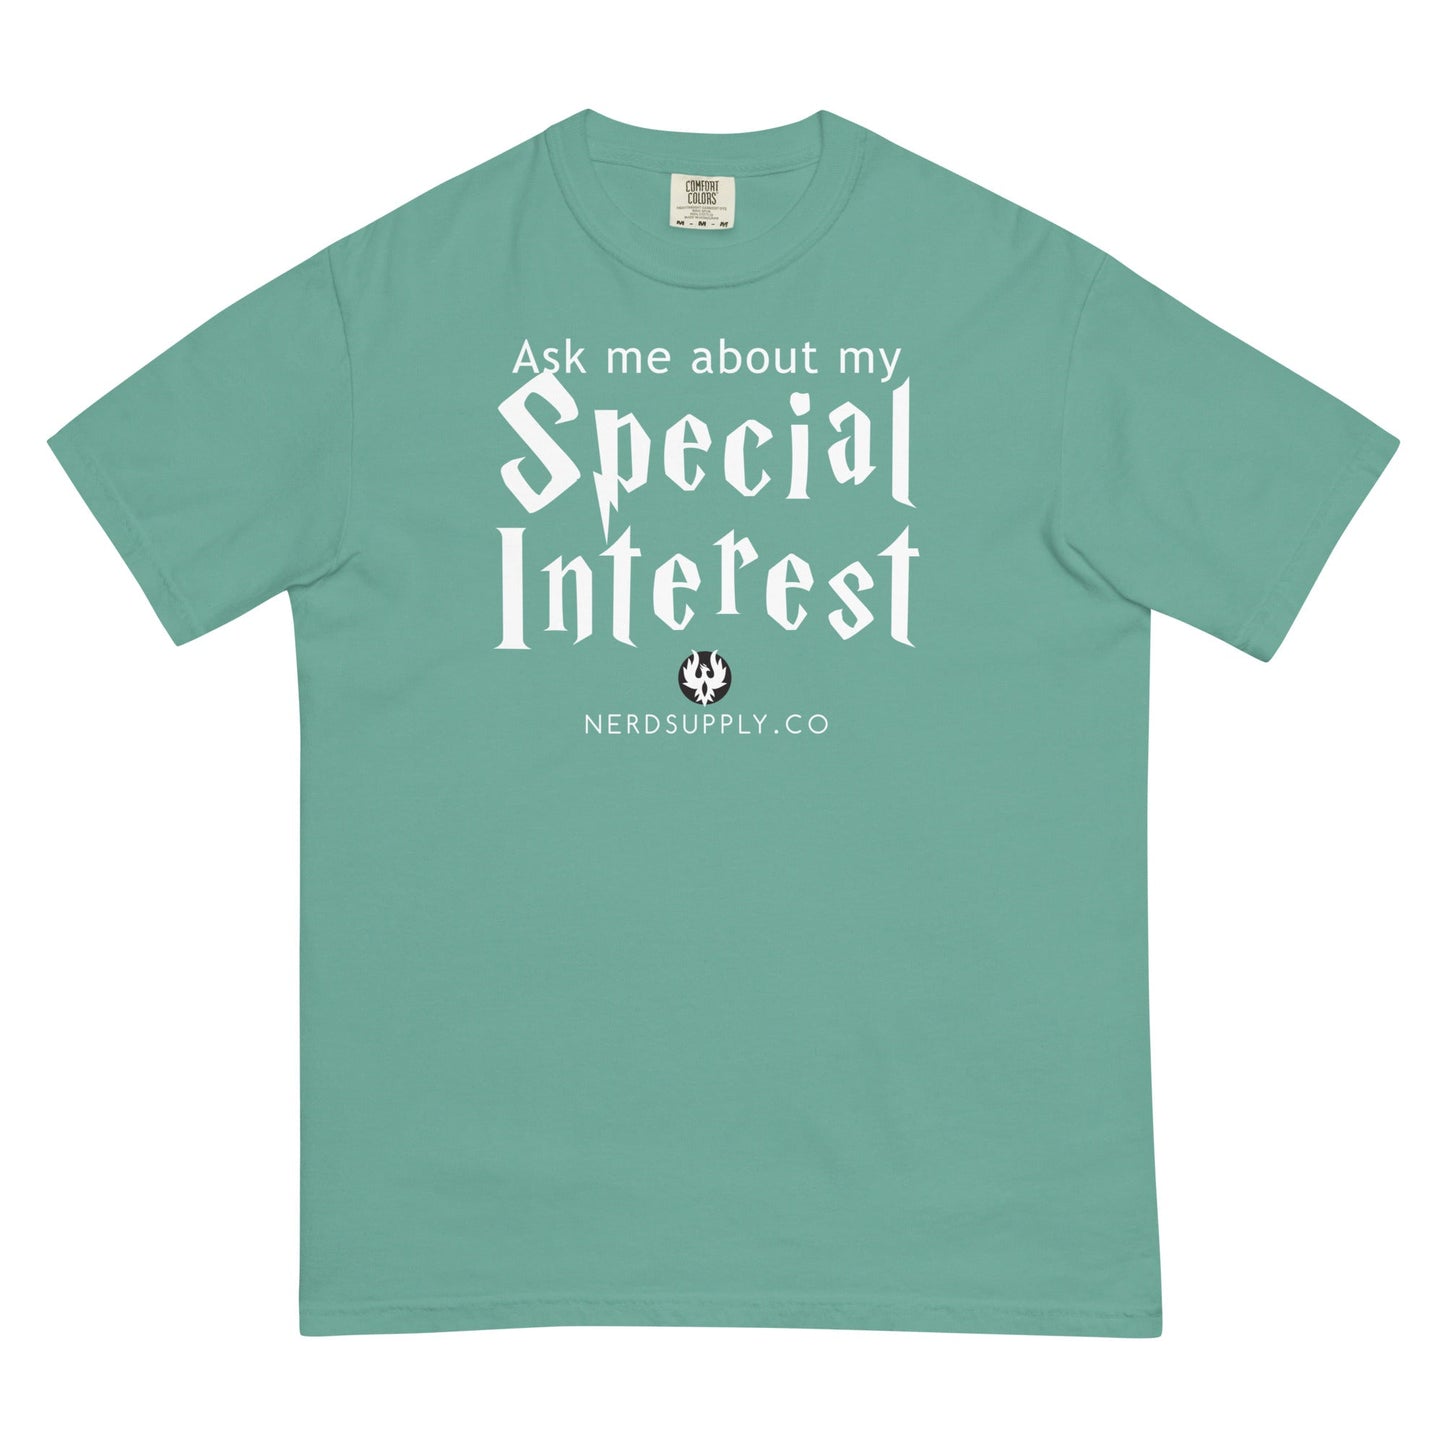 "Ask me about my Special Interest" - Potterish Font - The Nerd Supply Company